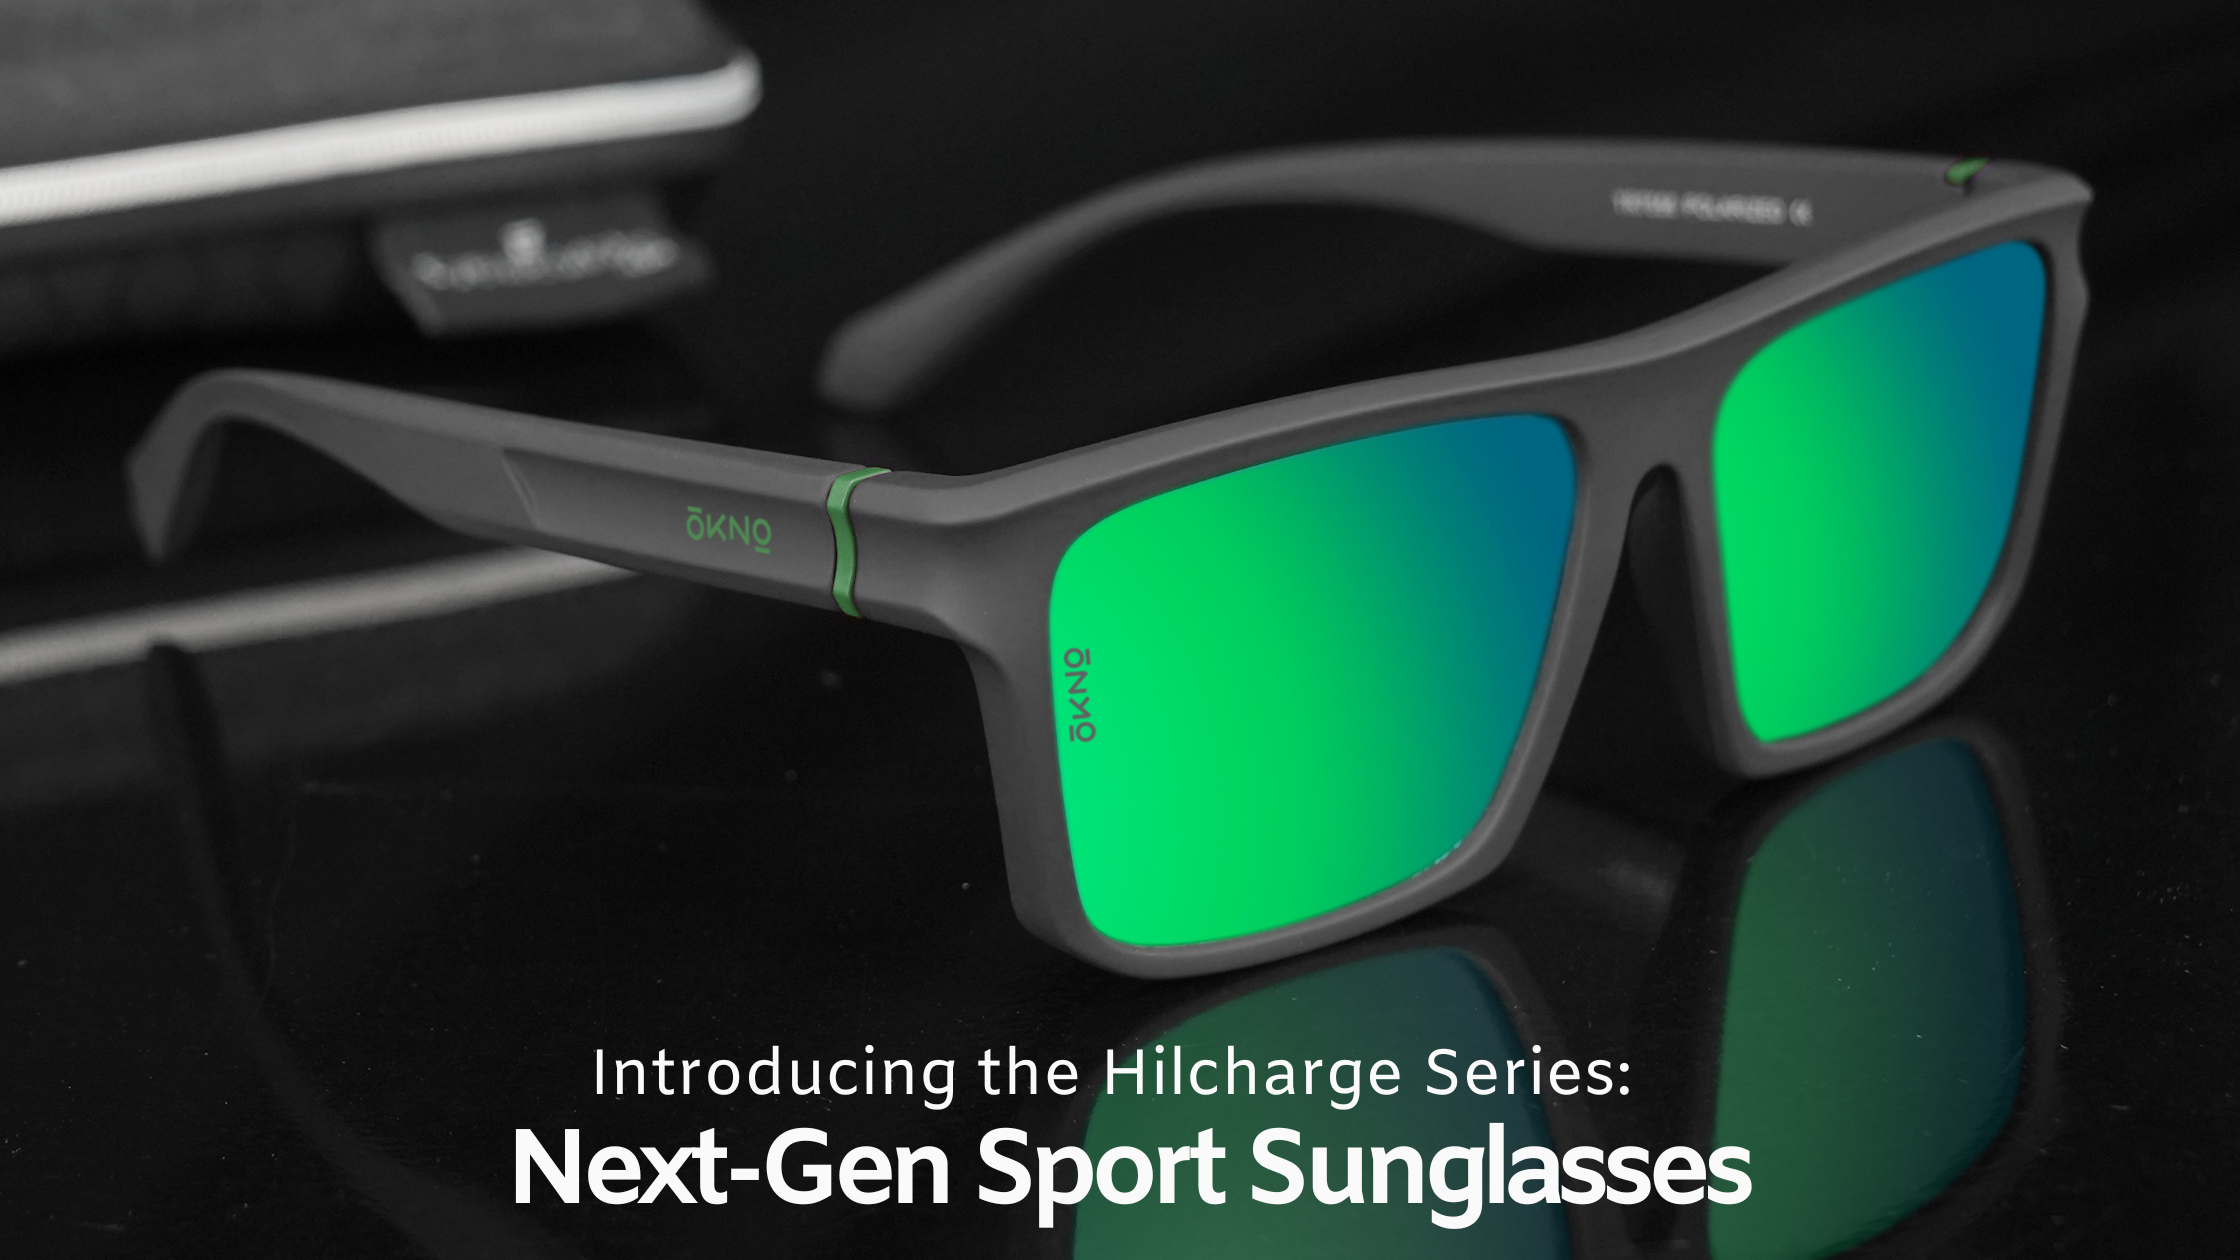 Introducing the Hilcharge Series: Next-Gen Sport Sunglasses